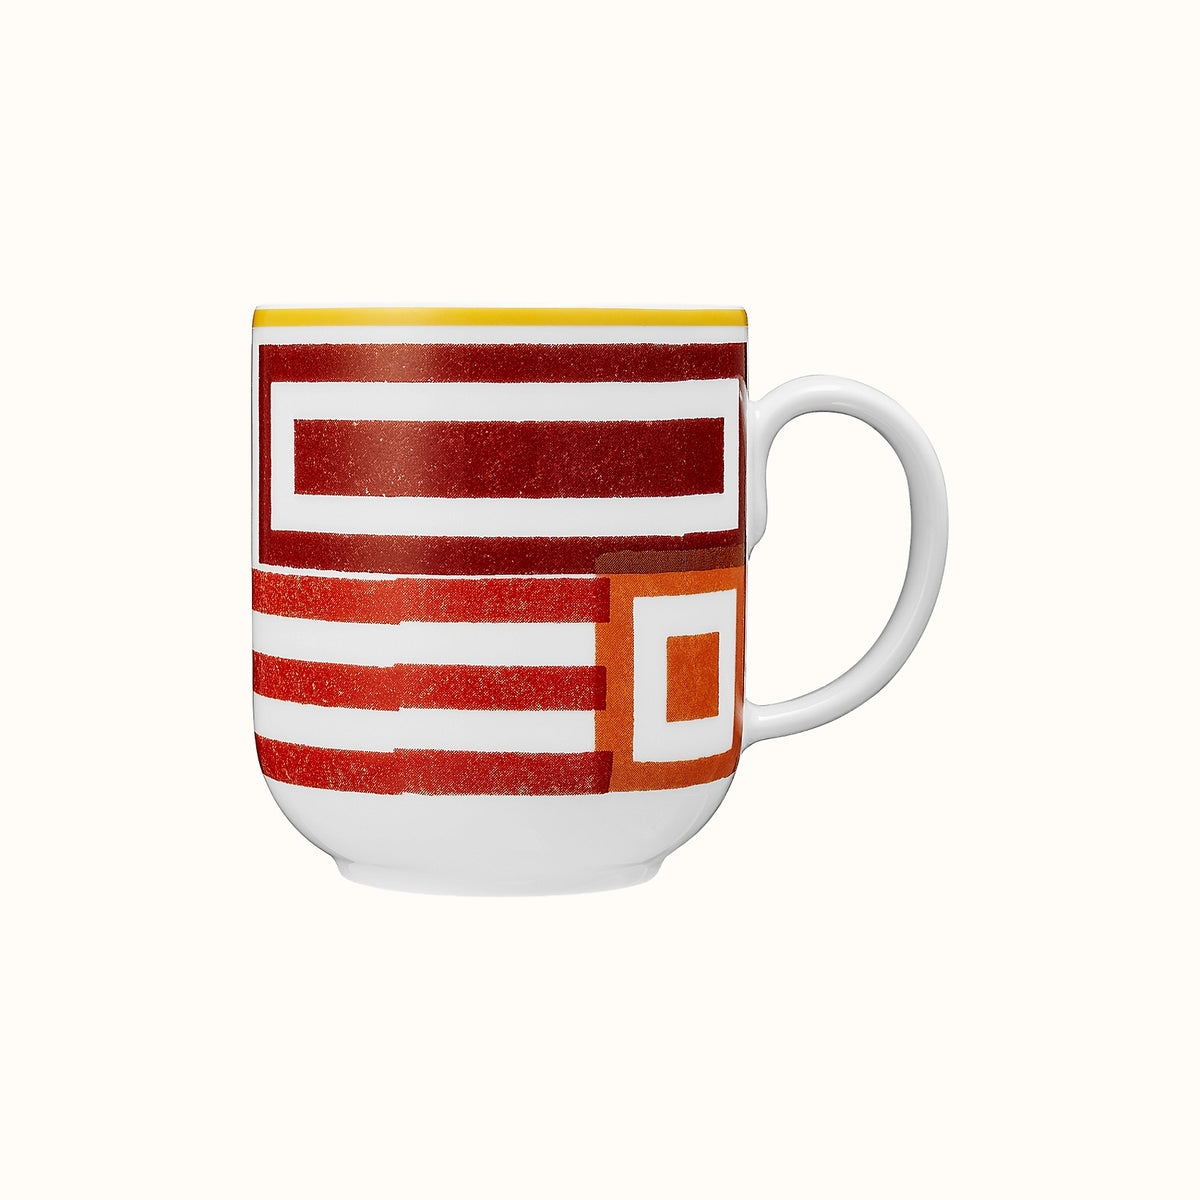 Hippomobile Coffee Cup and Saucer Nº 1